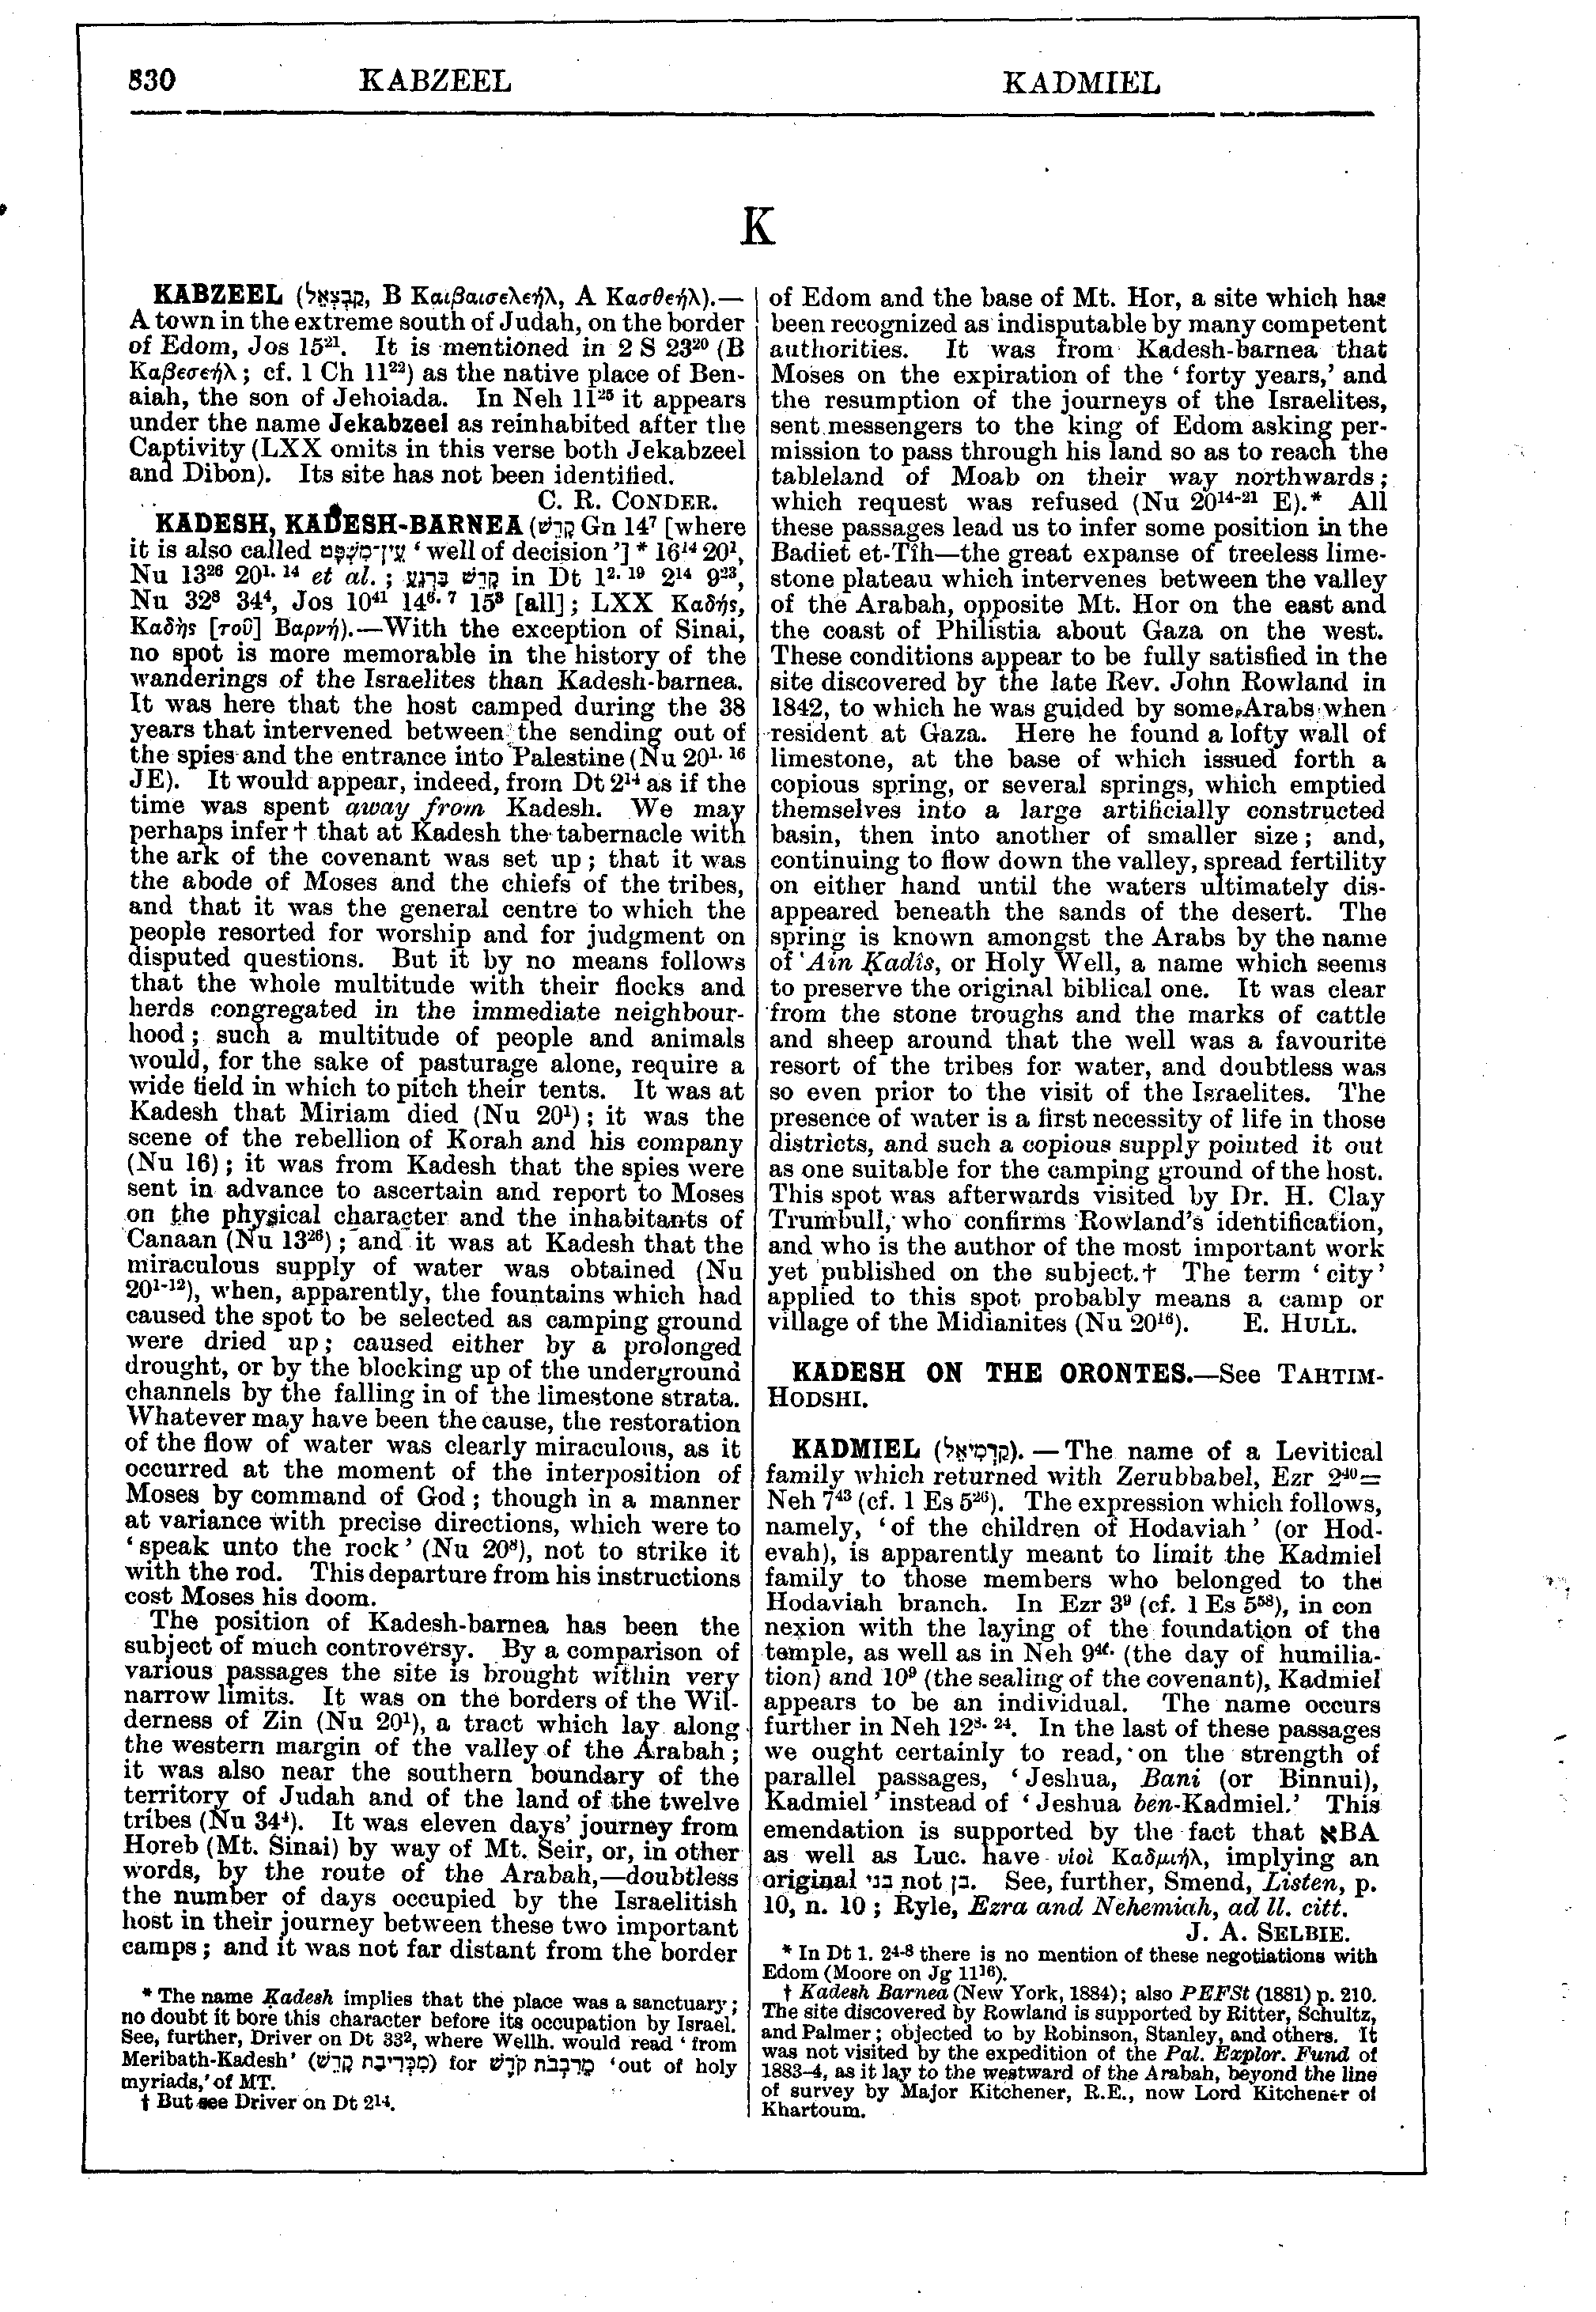 Image of page 830